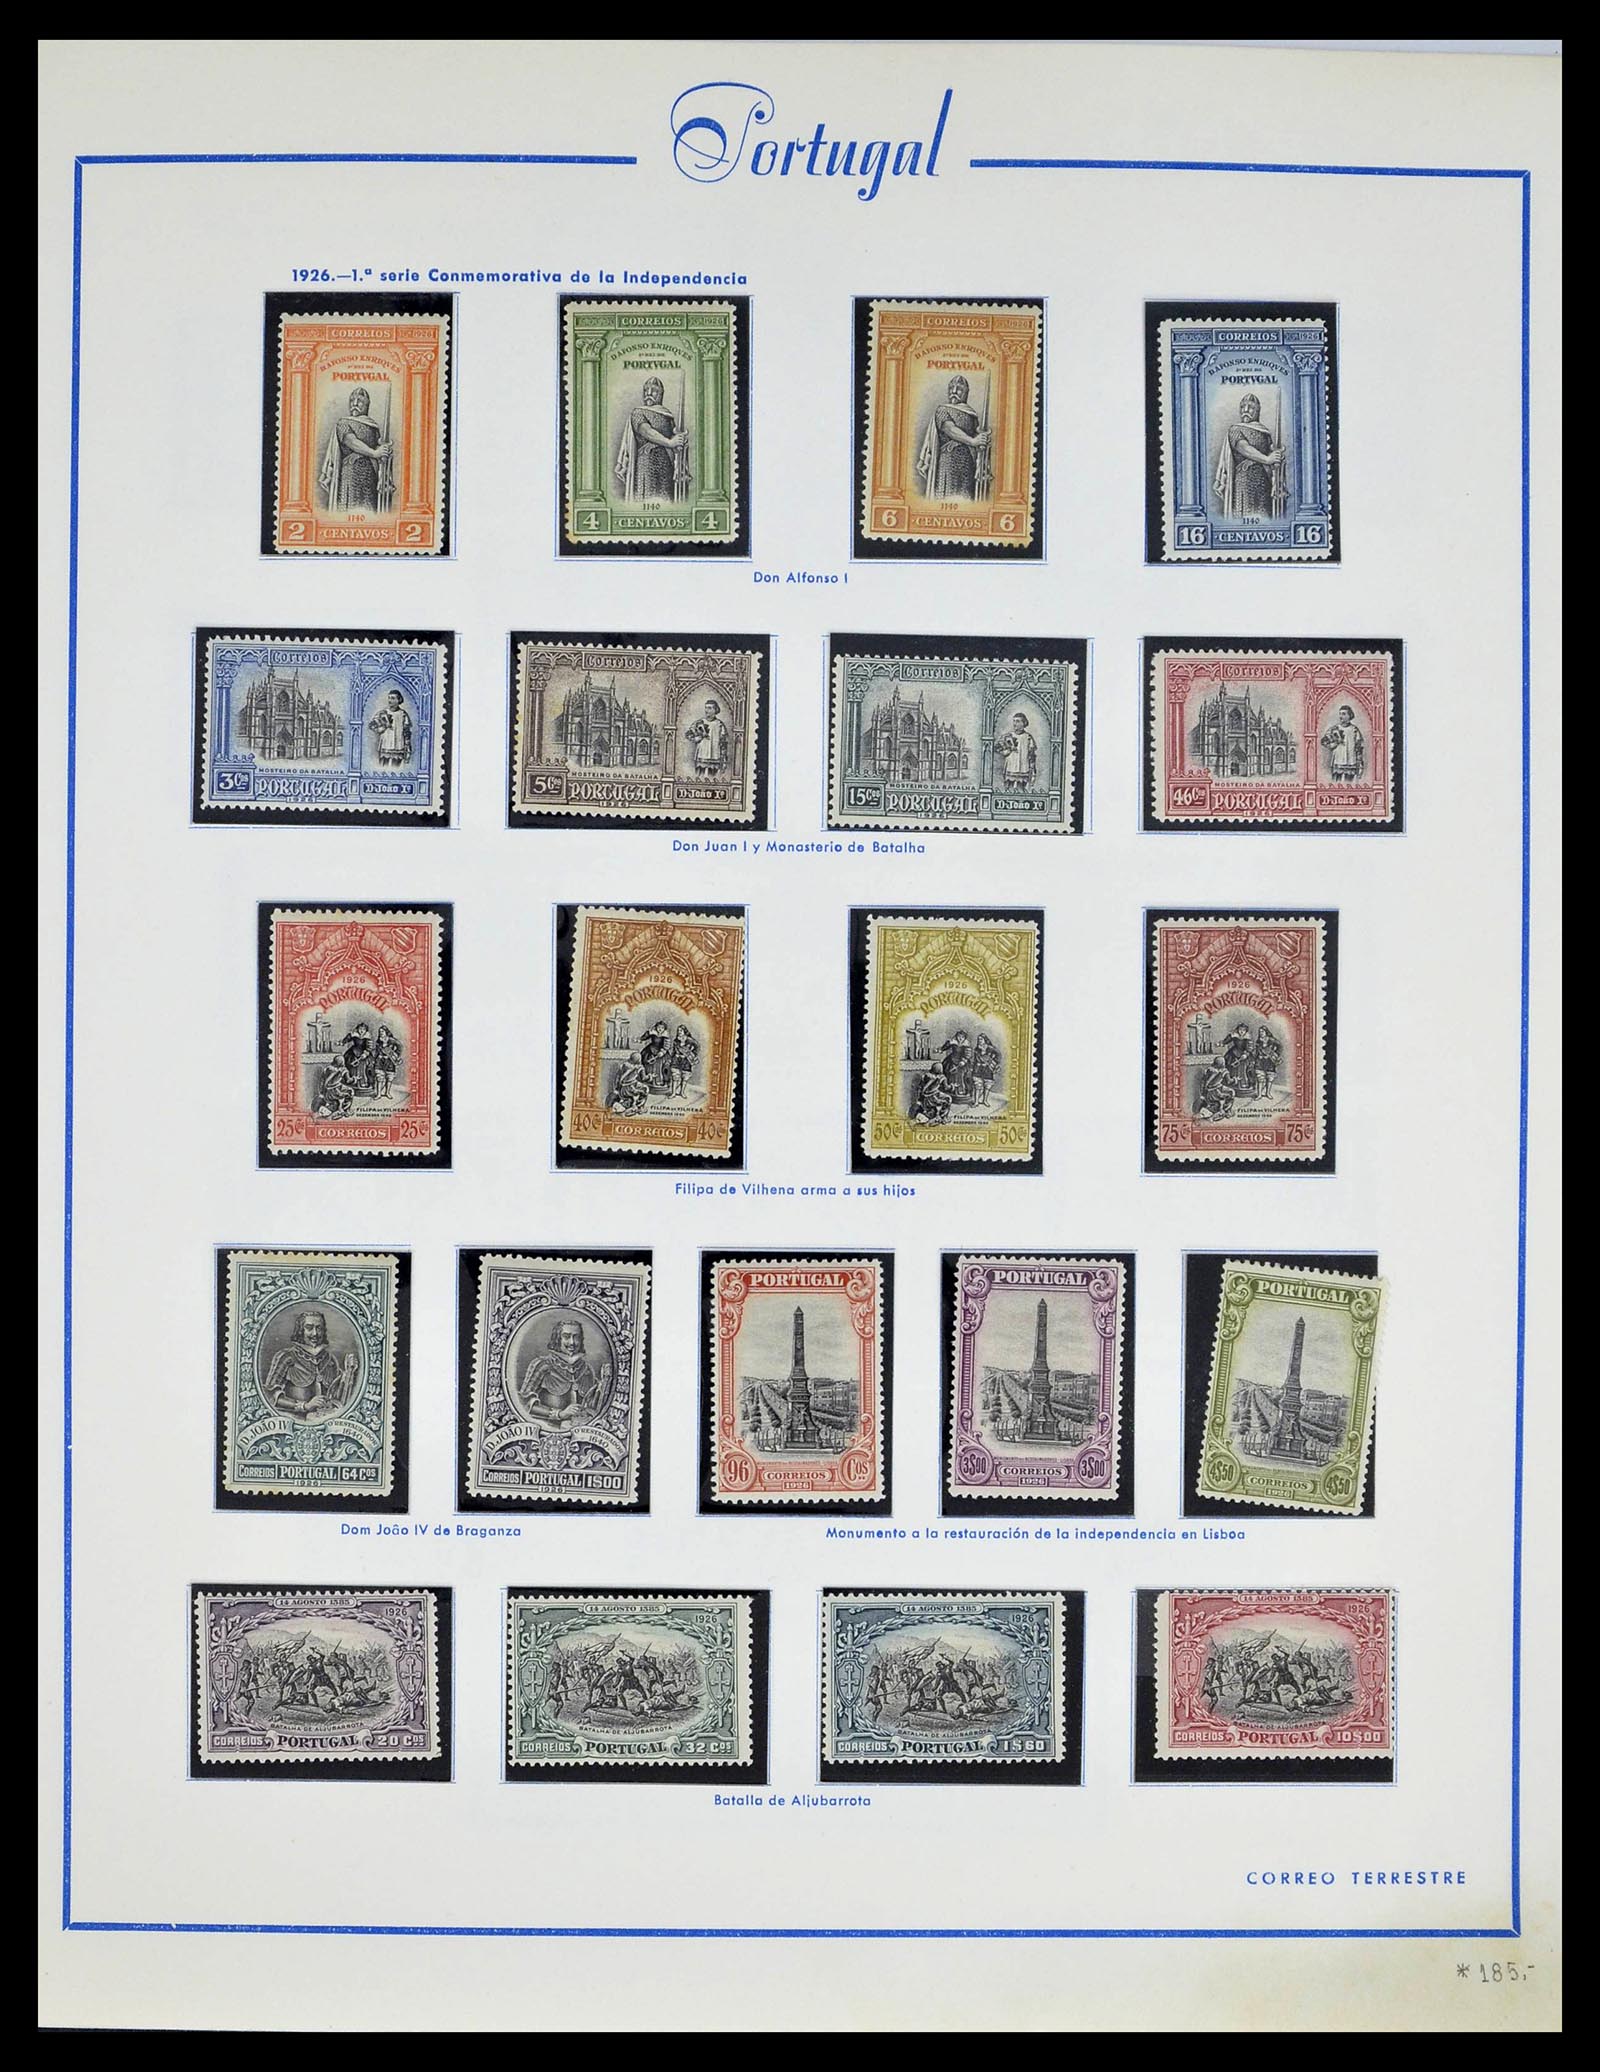 39233 0019 - Stamp collection 39233 Portugal 1853-1978.